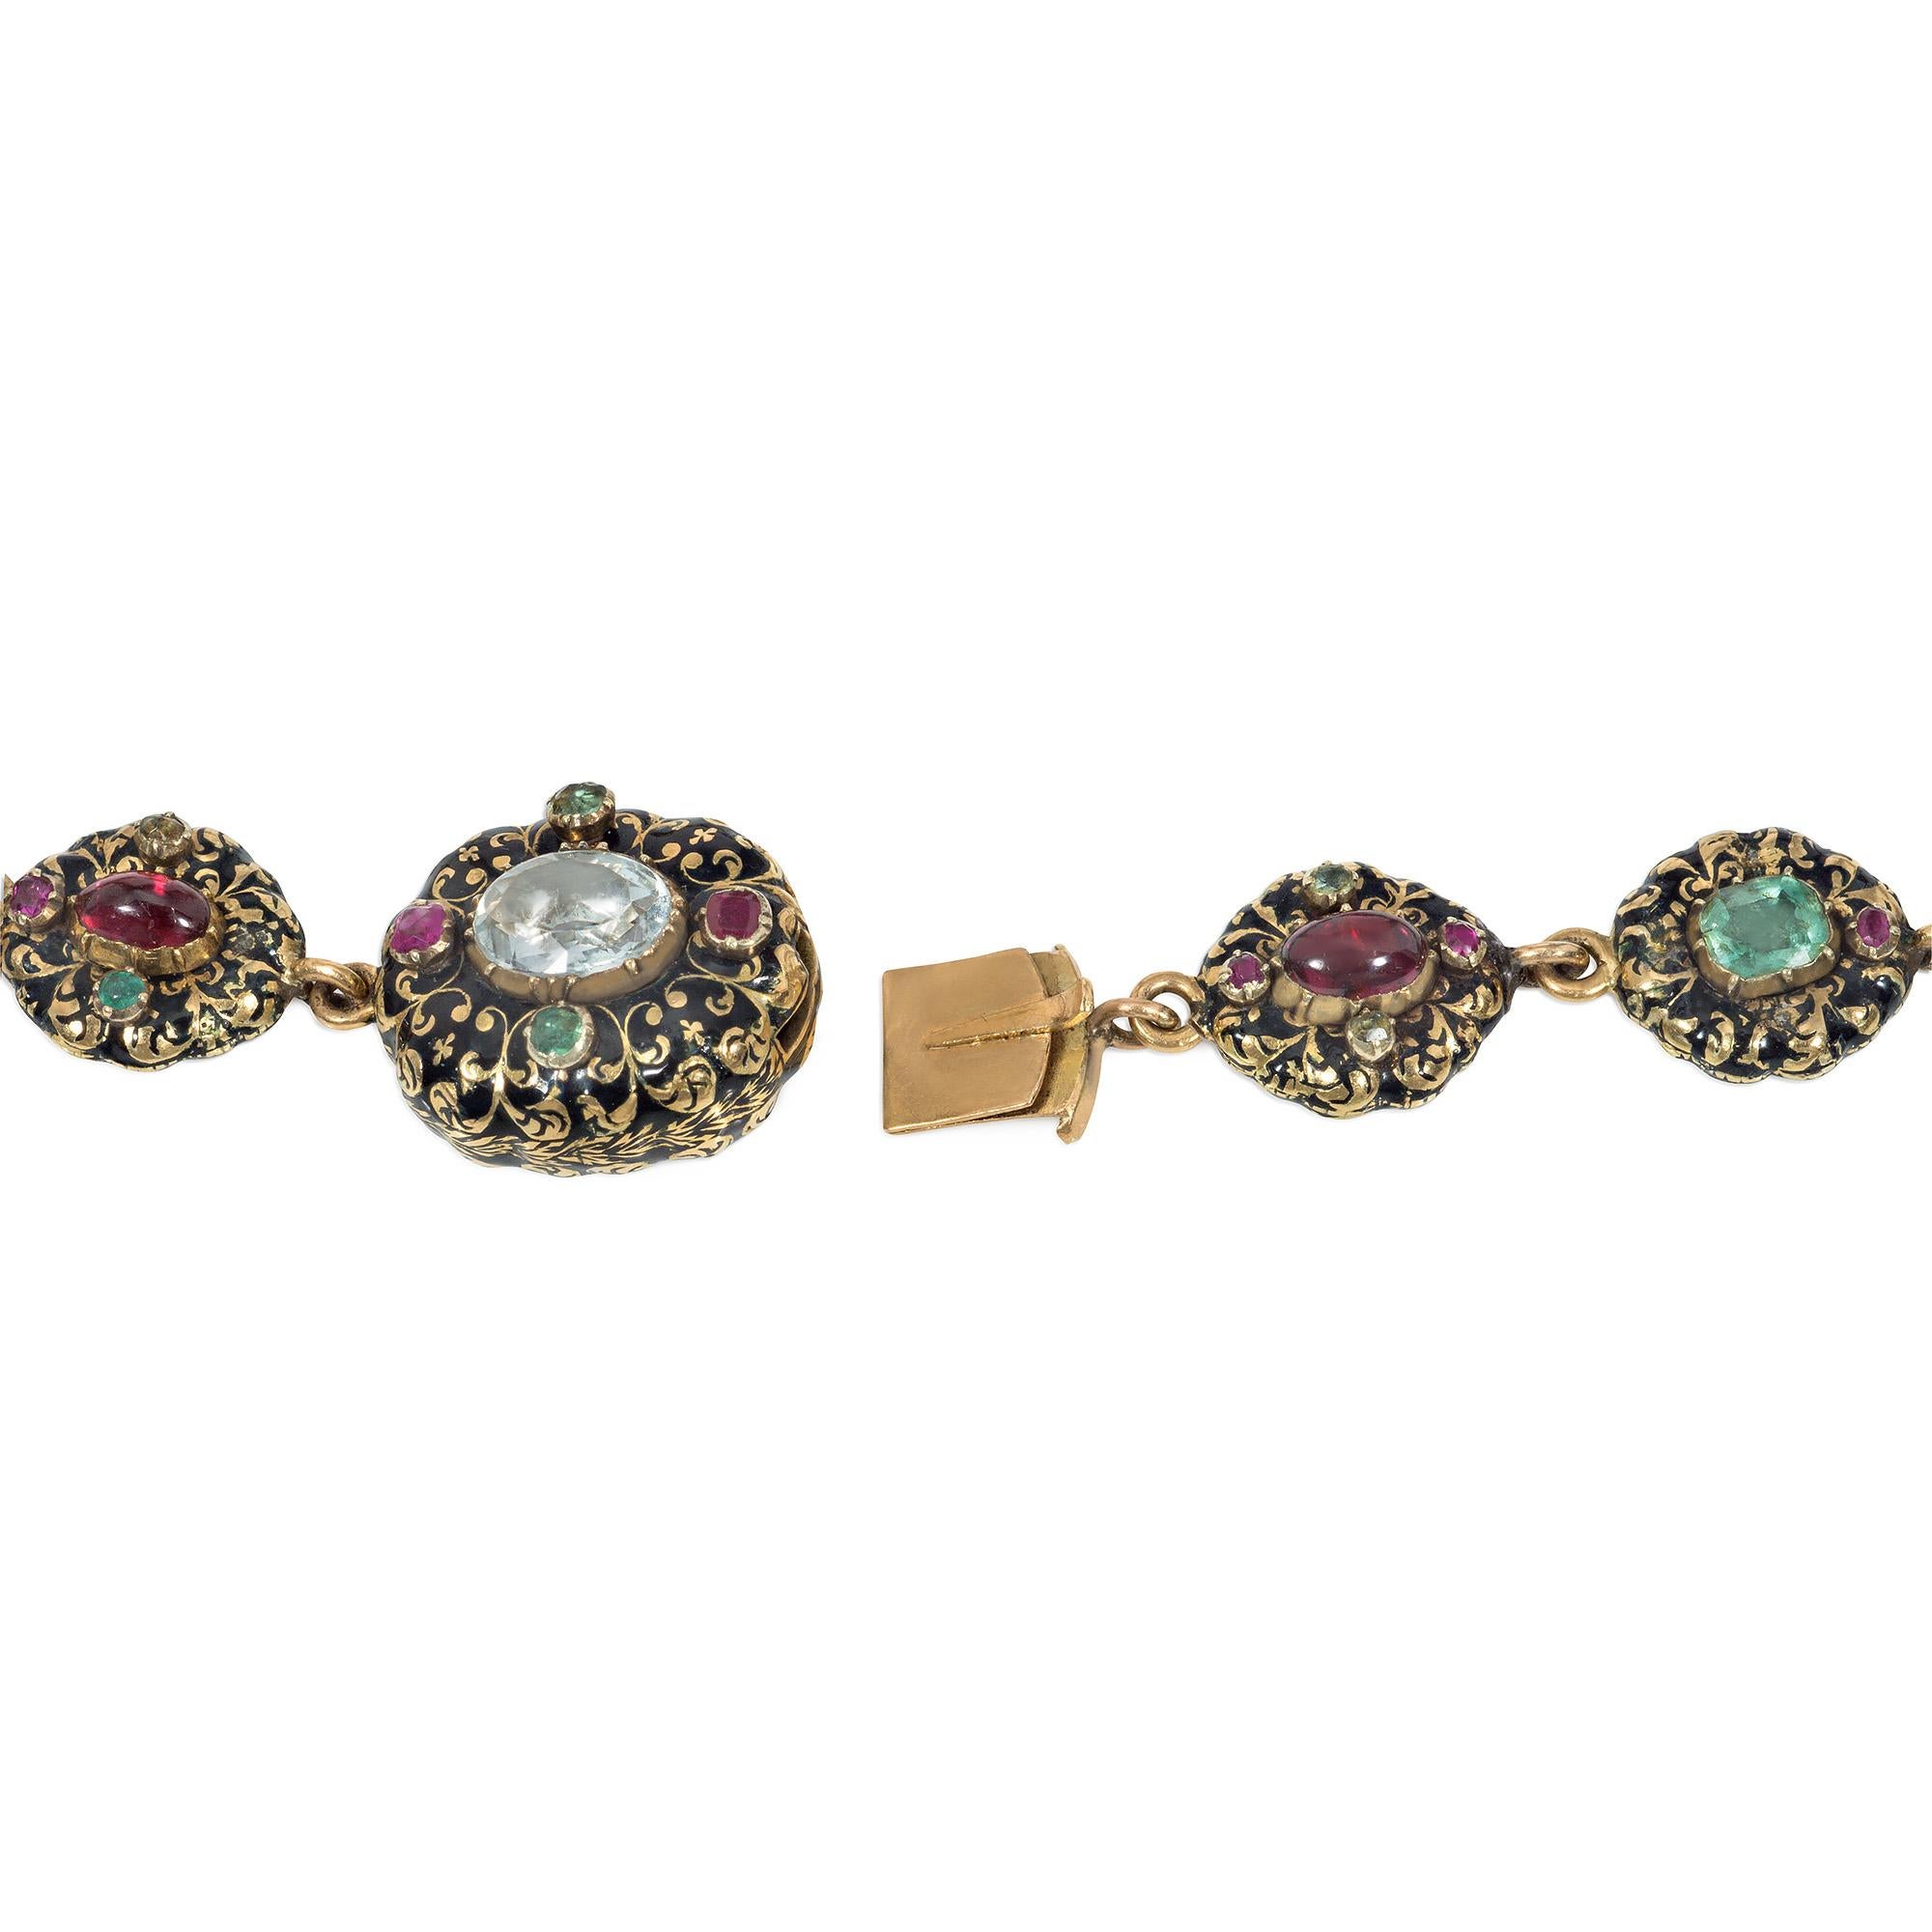 Important Antique Early-19th Century Swiss Enamel, Gold, and Multi-Gem Necklace In Good Condition For Sale In New York, NY